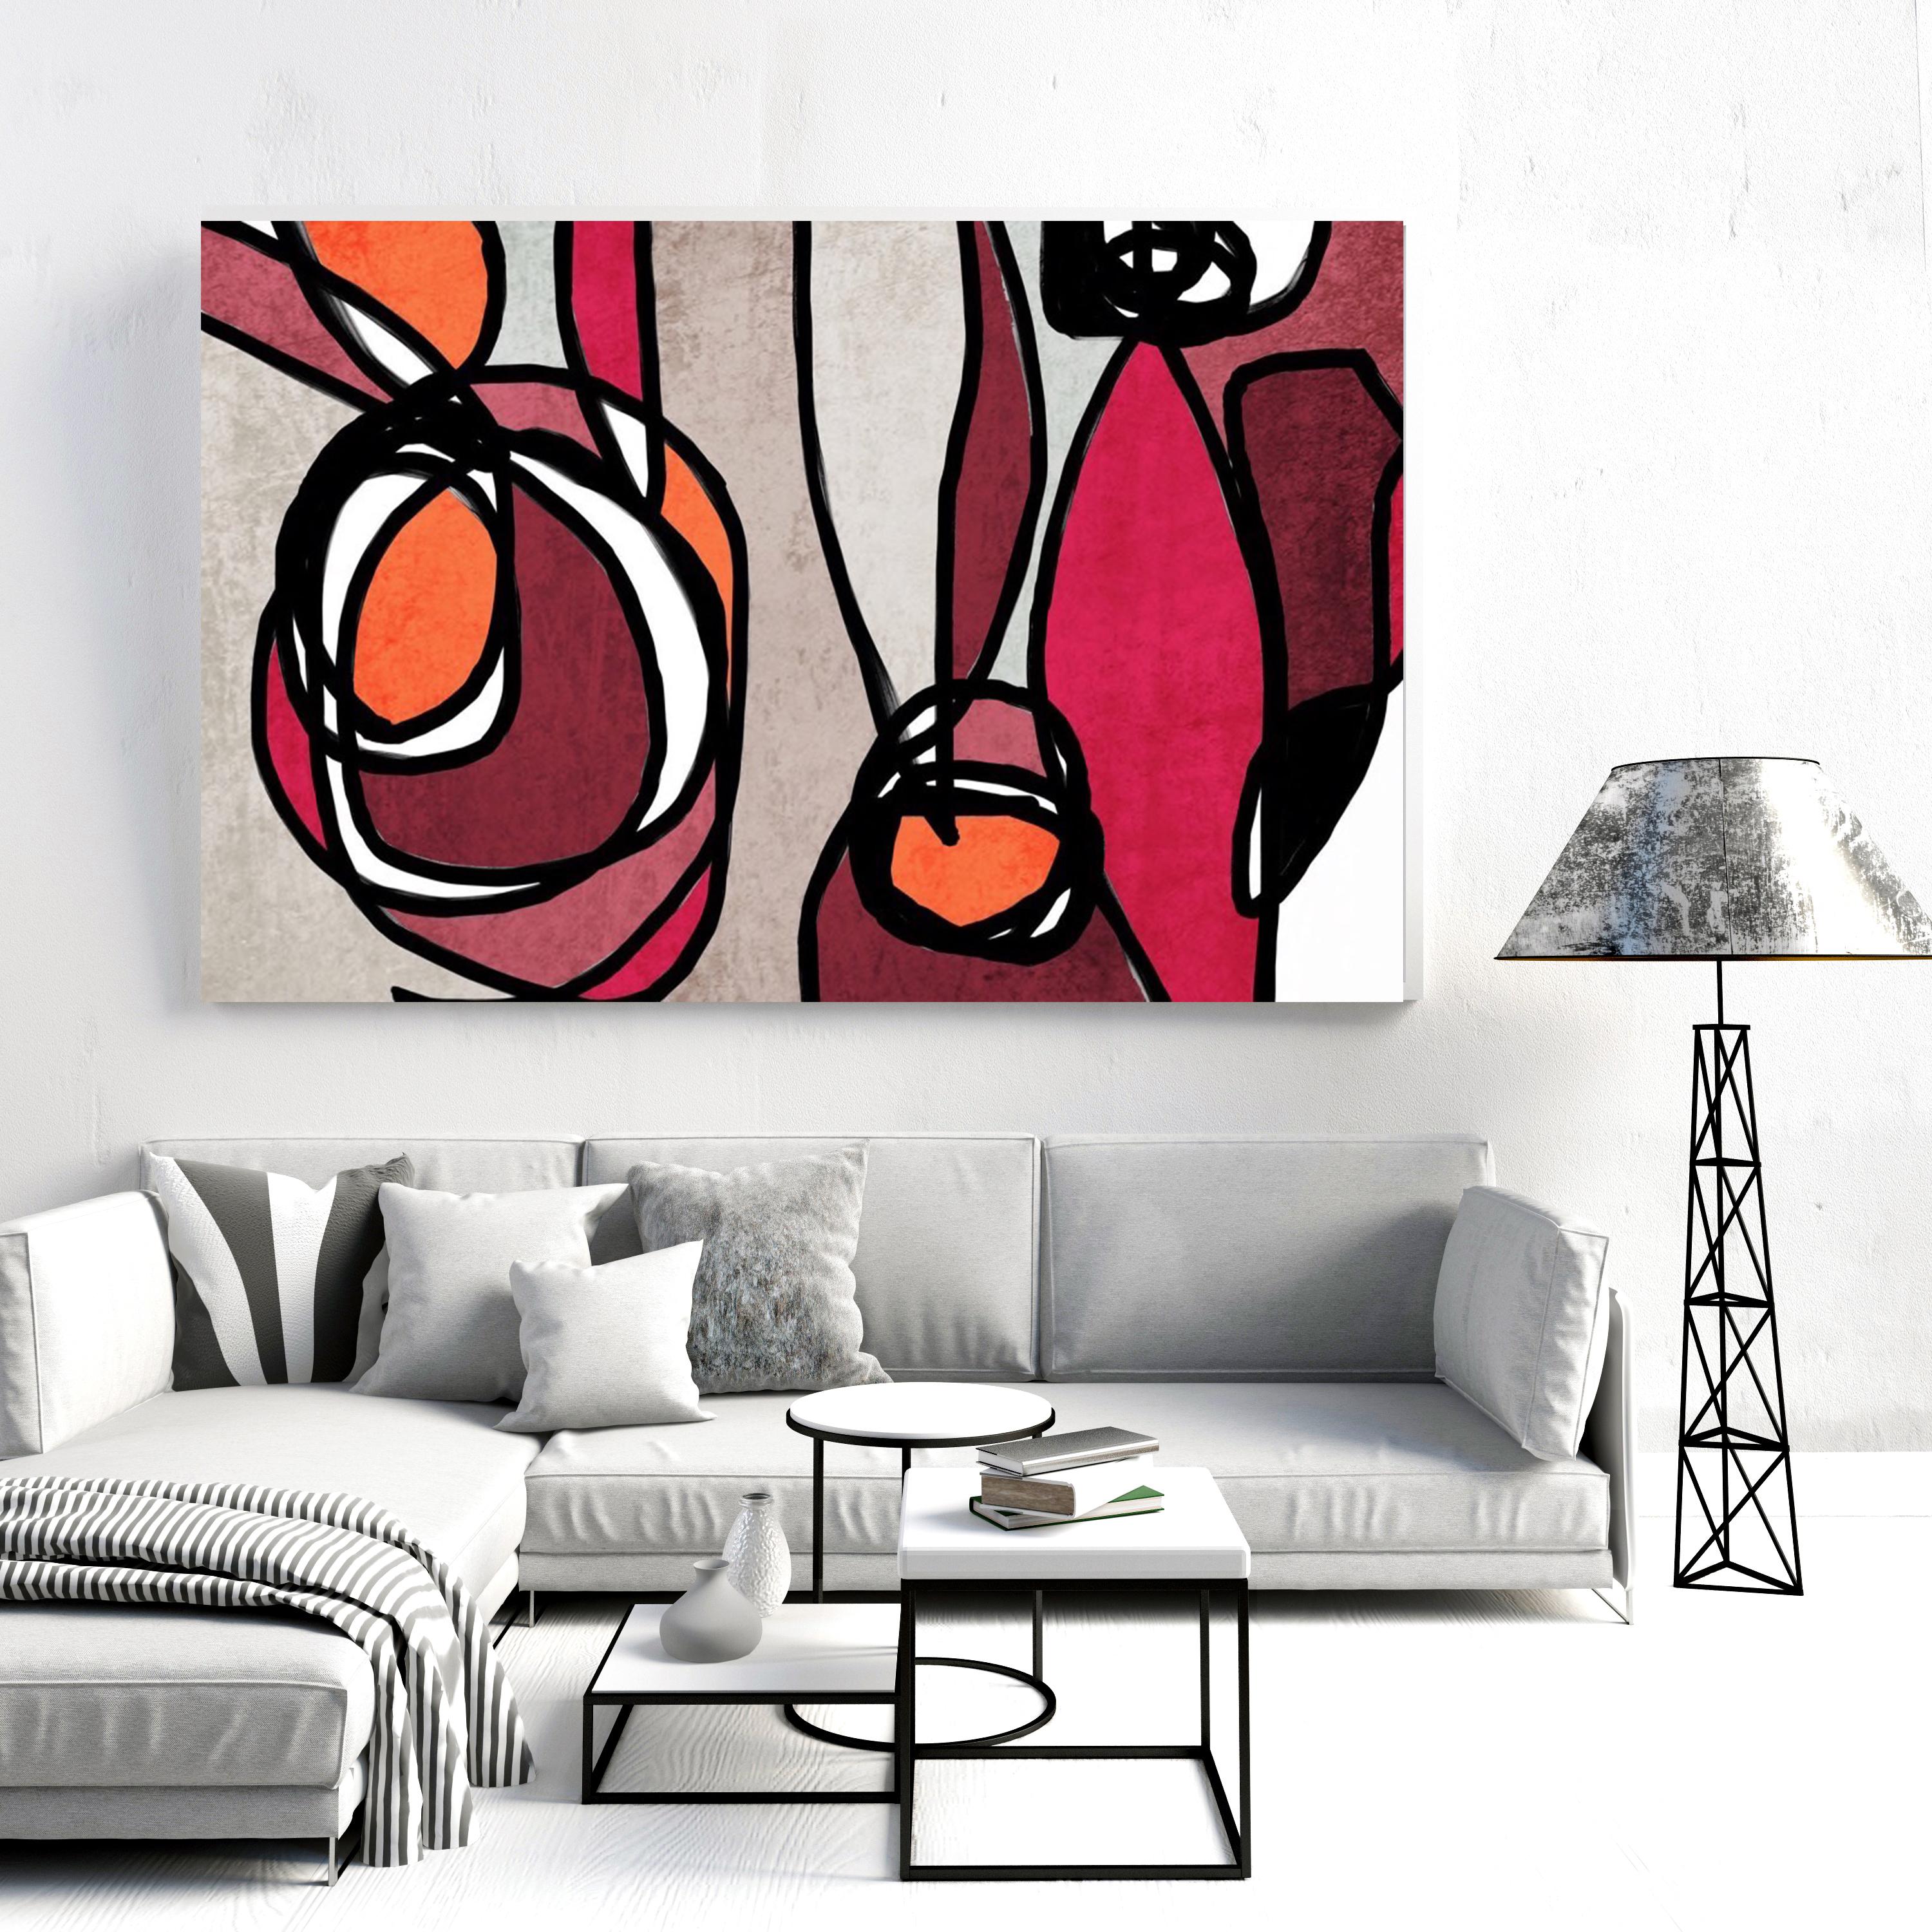 Vivid Red Mid Century Modern Painting Mixed Media on Canvas 40x60"